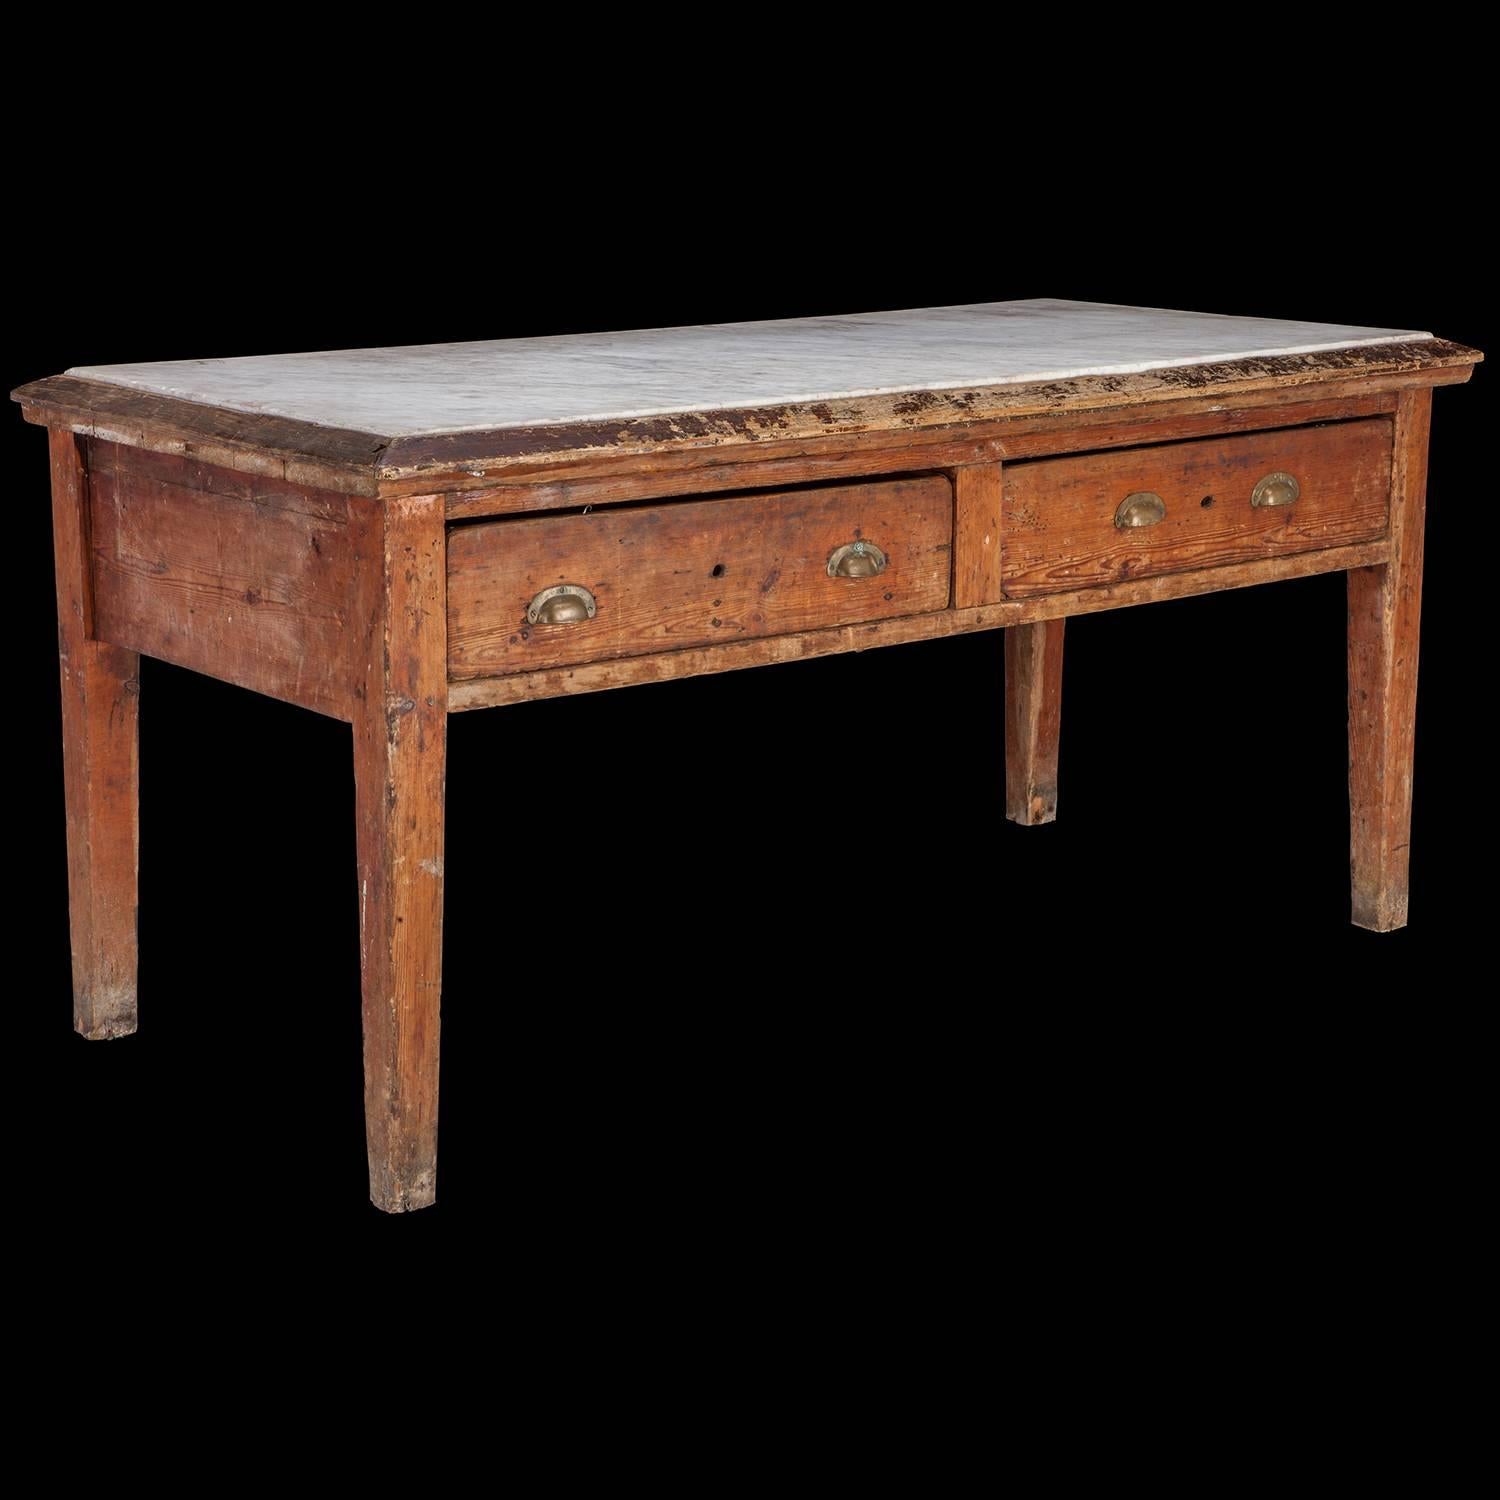 Two-drawer pine table with inset marble top and original brass pulls. Used to knead bread dough.